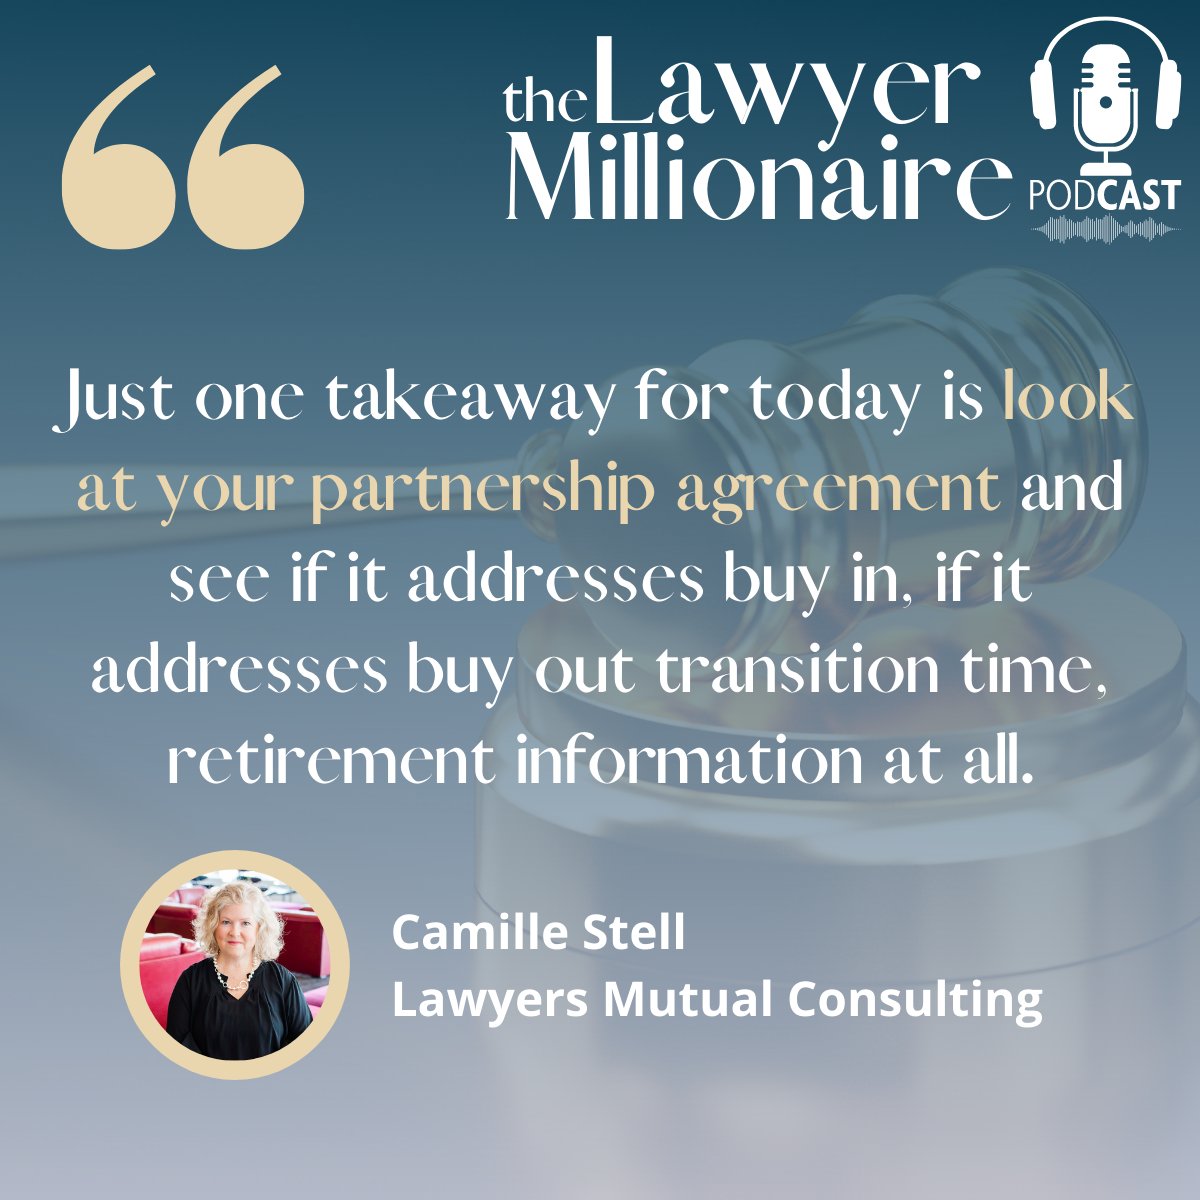 Looking to attract top talent to your law firm? 🌟 Tune in to The Lawyer Millionaire Podcast and learn how investing in your firm's infrastructure and culture can make it more appealing to the next generation of lawyers. Don't miss this game-changing episode! #LawFirmCulture